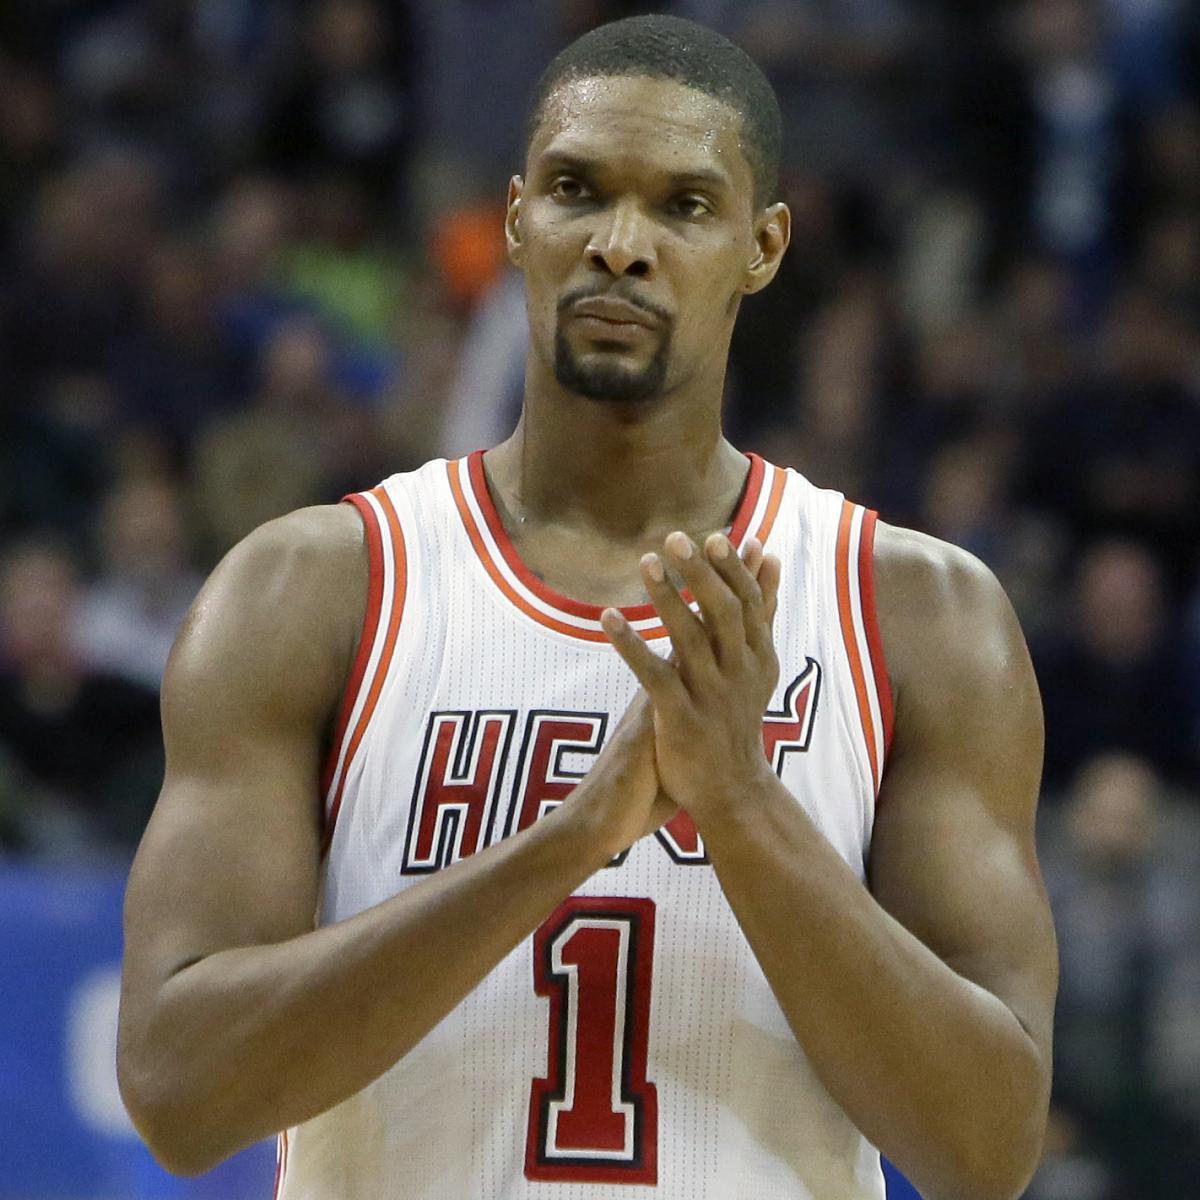 Chris Bosh on NBA Career: 'I've Made the Decision Not to Pursue It